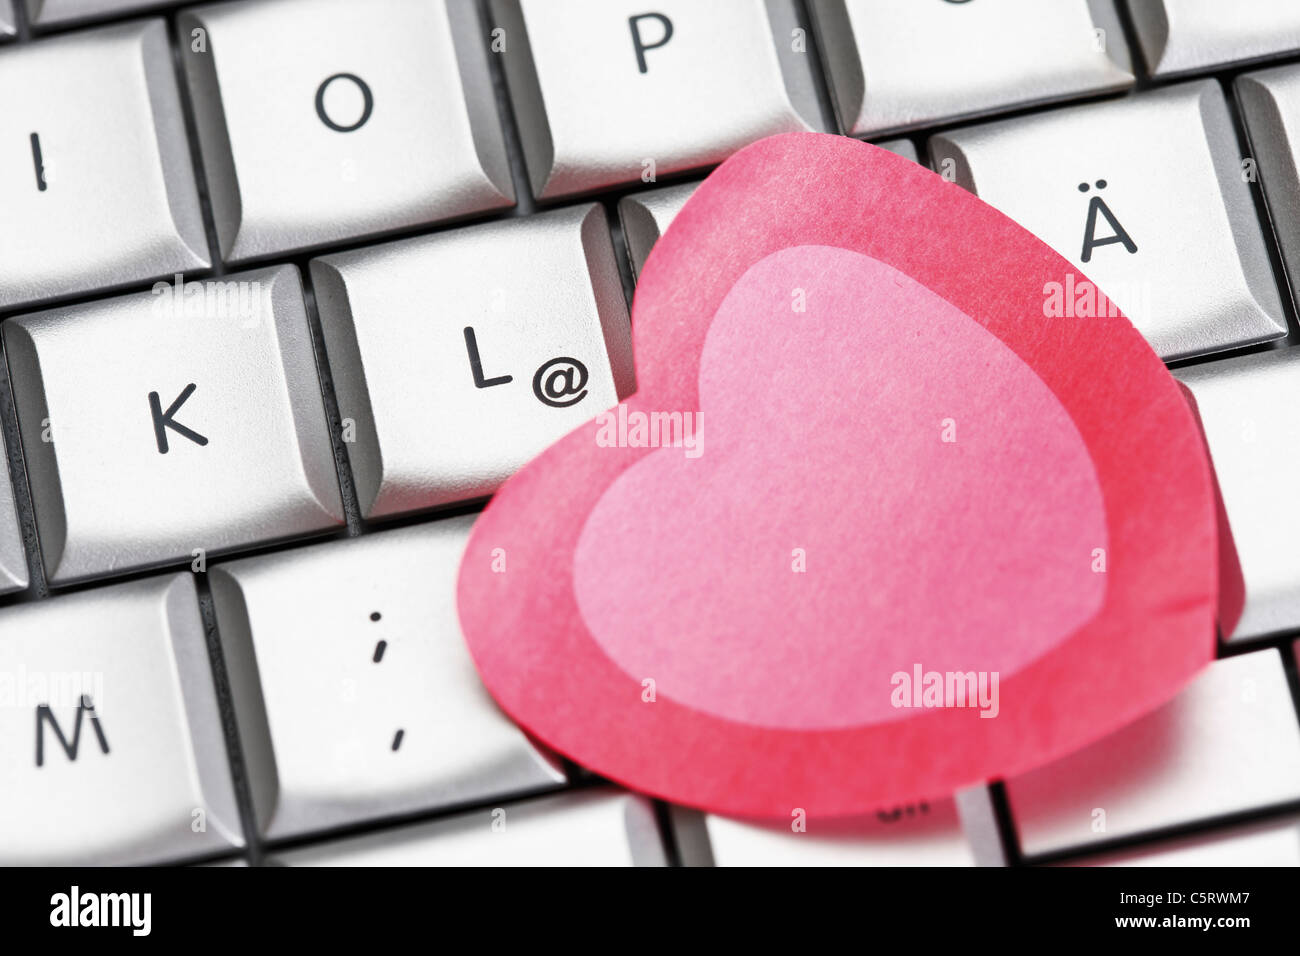 Heart-shaped notes on notebook, elevated view Stock Photo